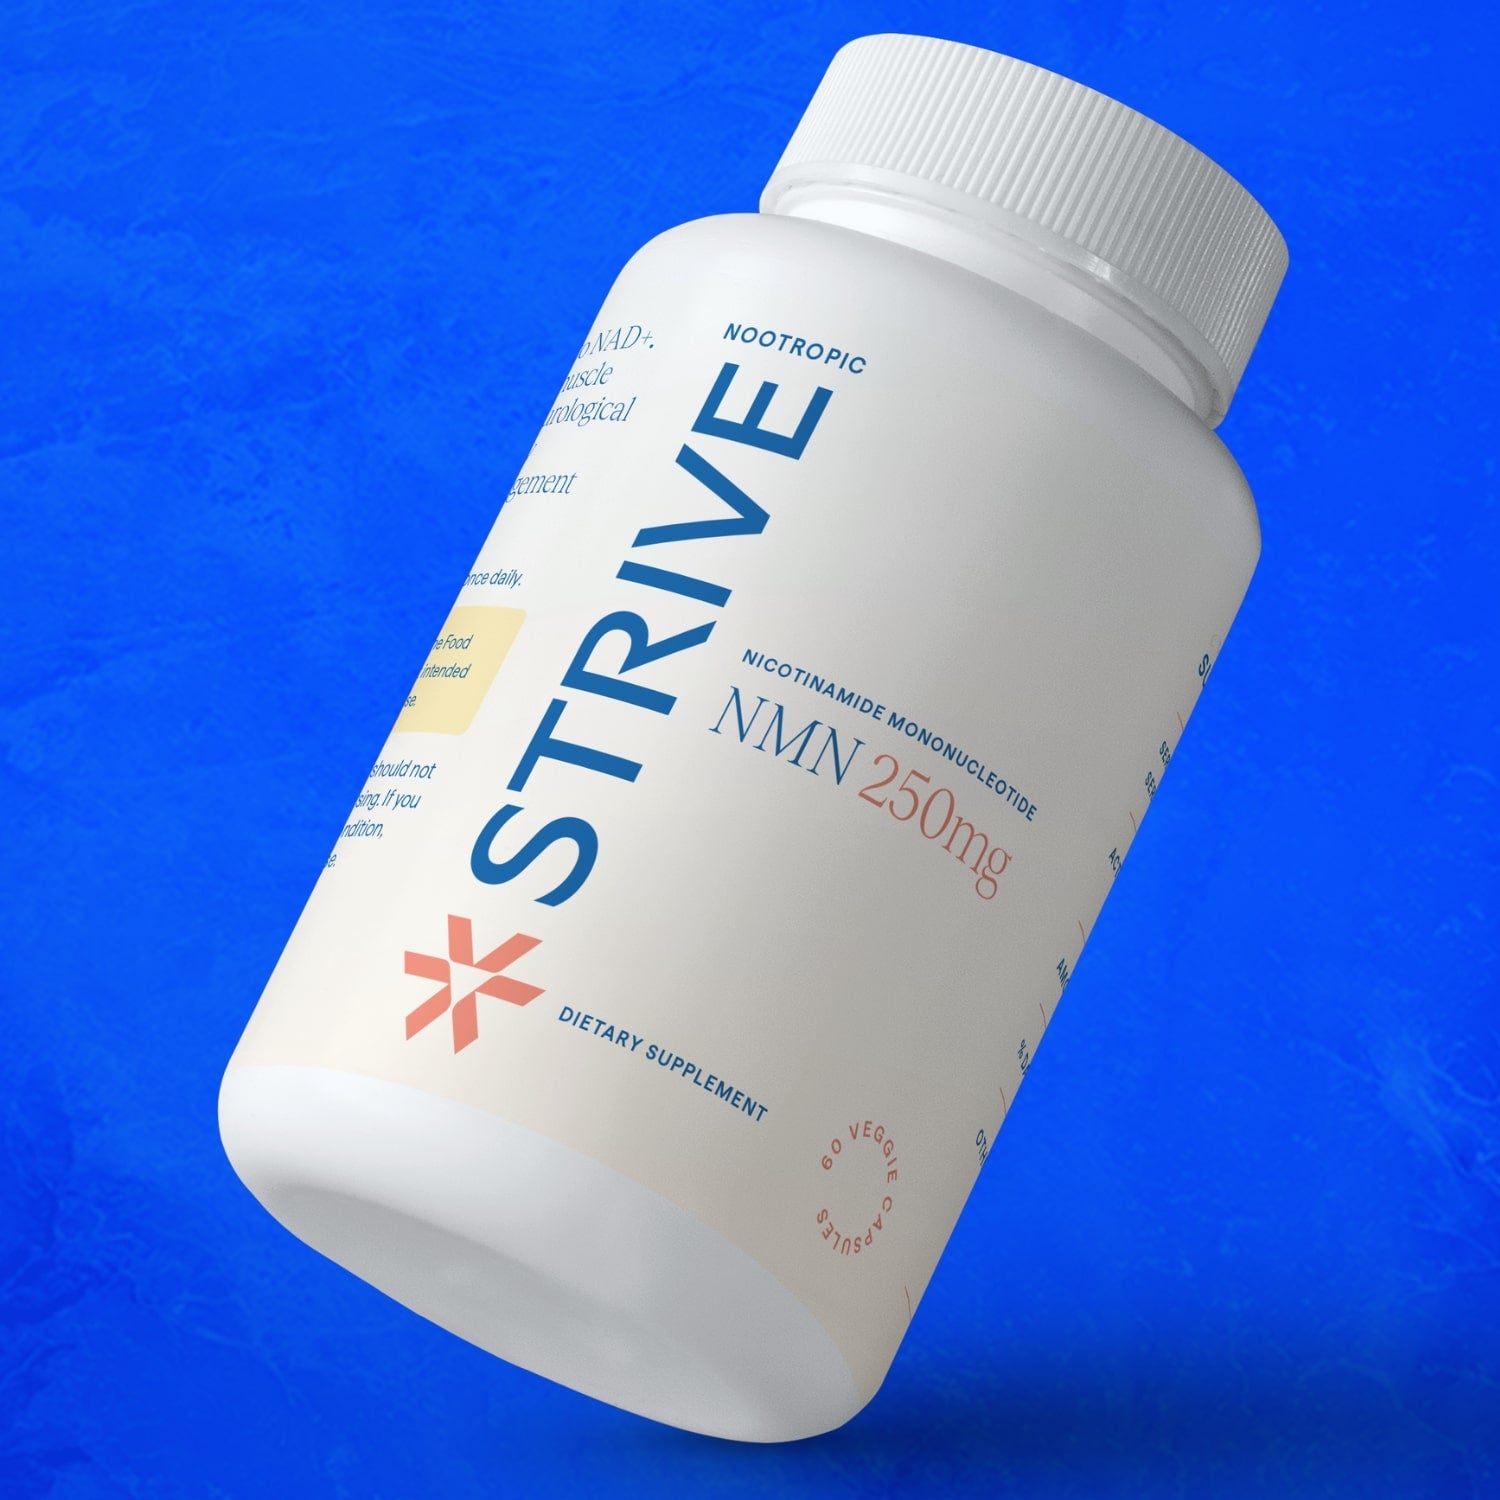 A white bottle of Strive Peptides NMN 250mg Nootropic Capsules floating in front of a bright blue background